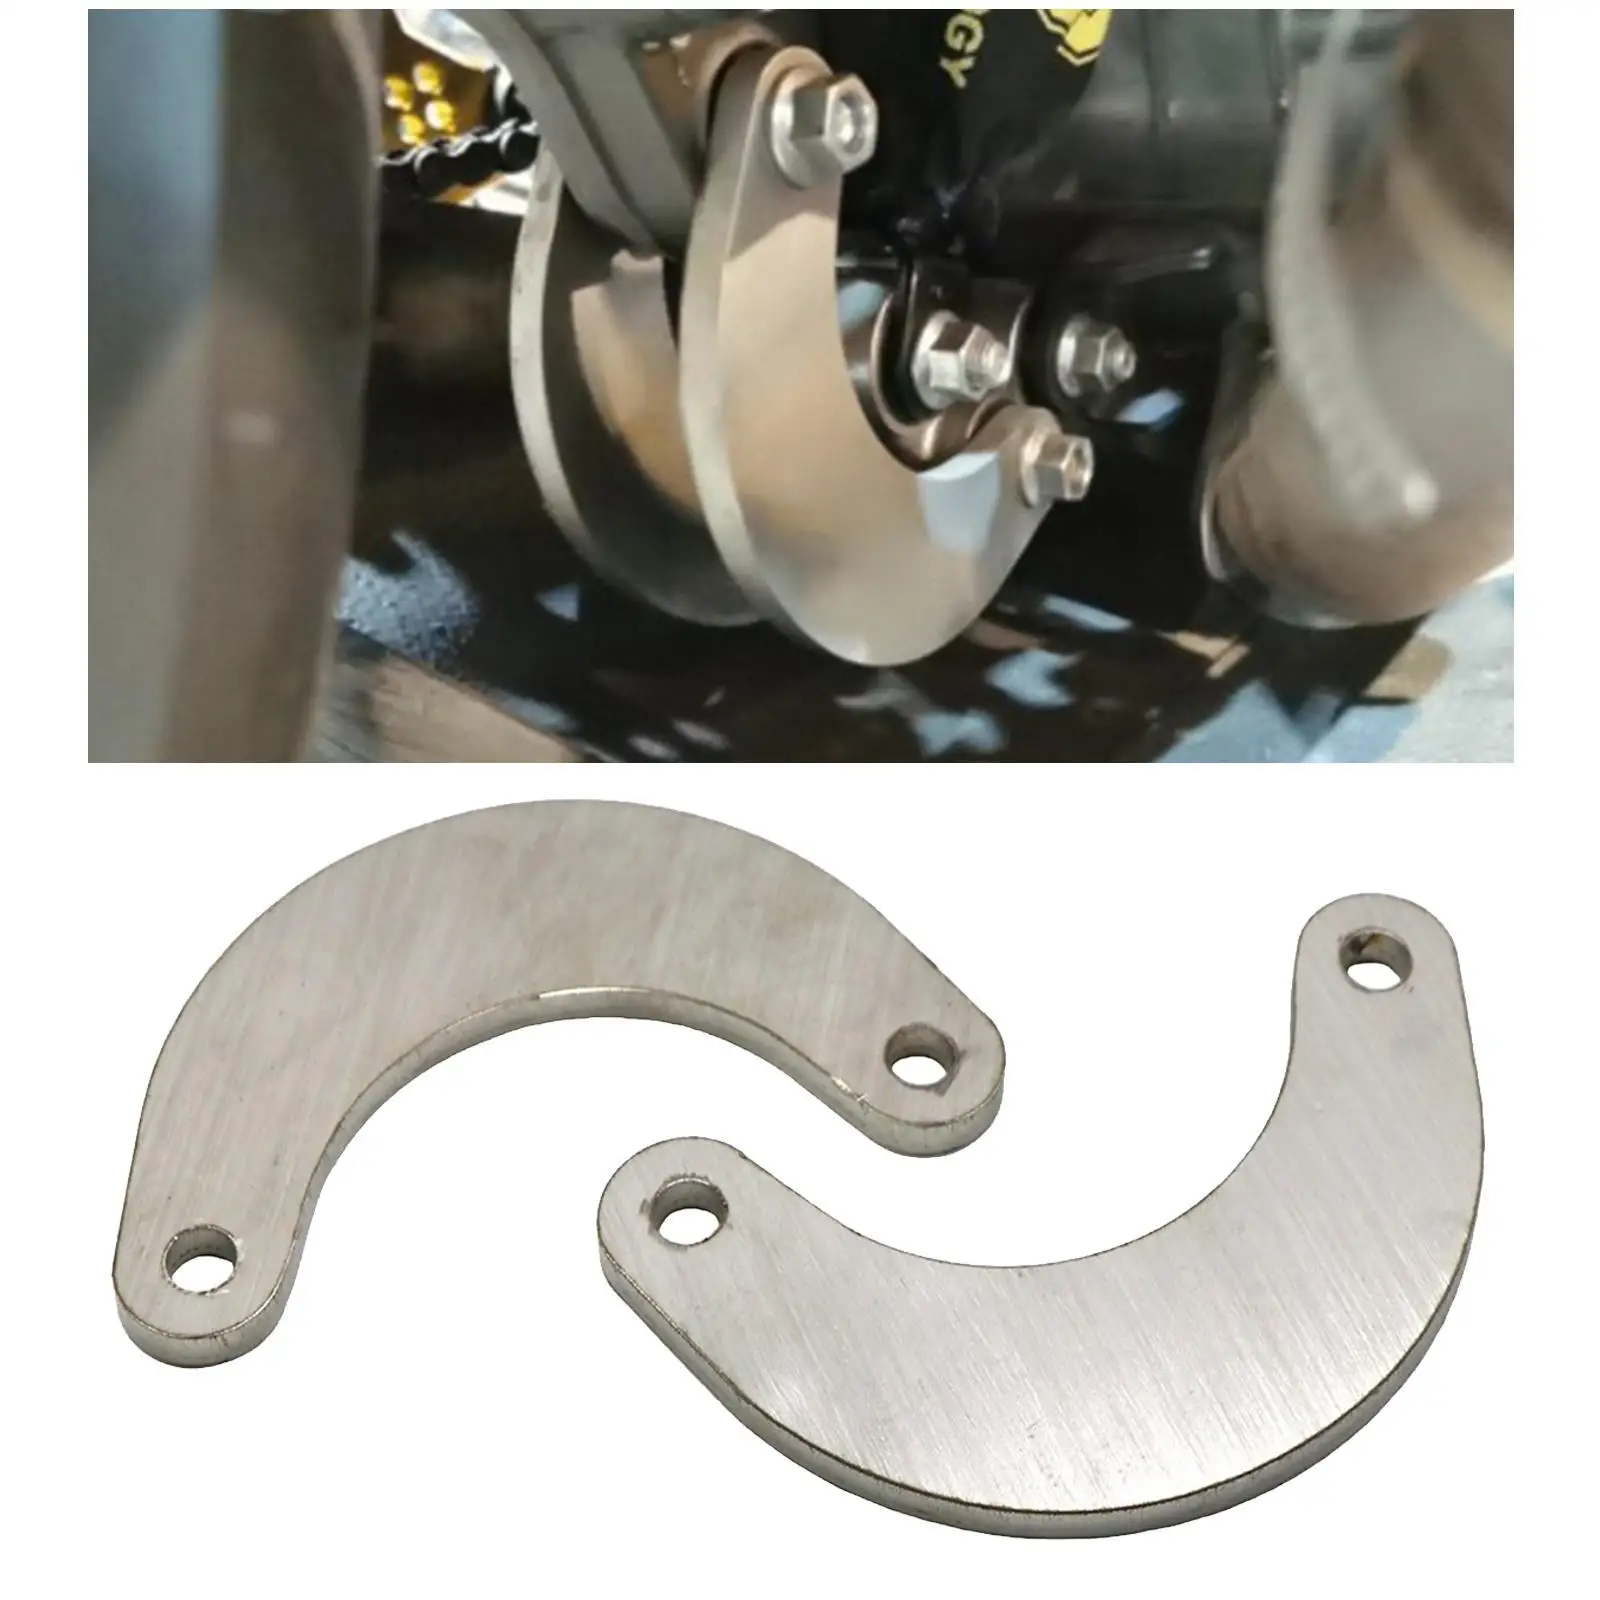 Stainless Steel Lowering Links  Lower the Body and Lower the AdjustmentFits for  MT-15  2015 Replace Modification Parts